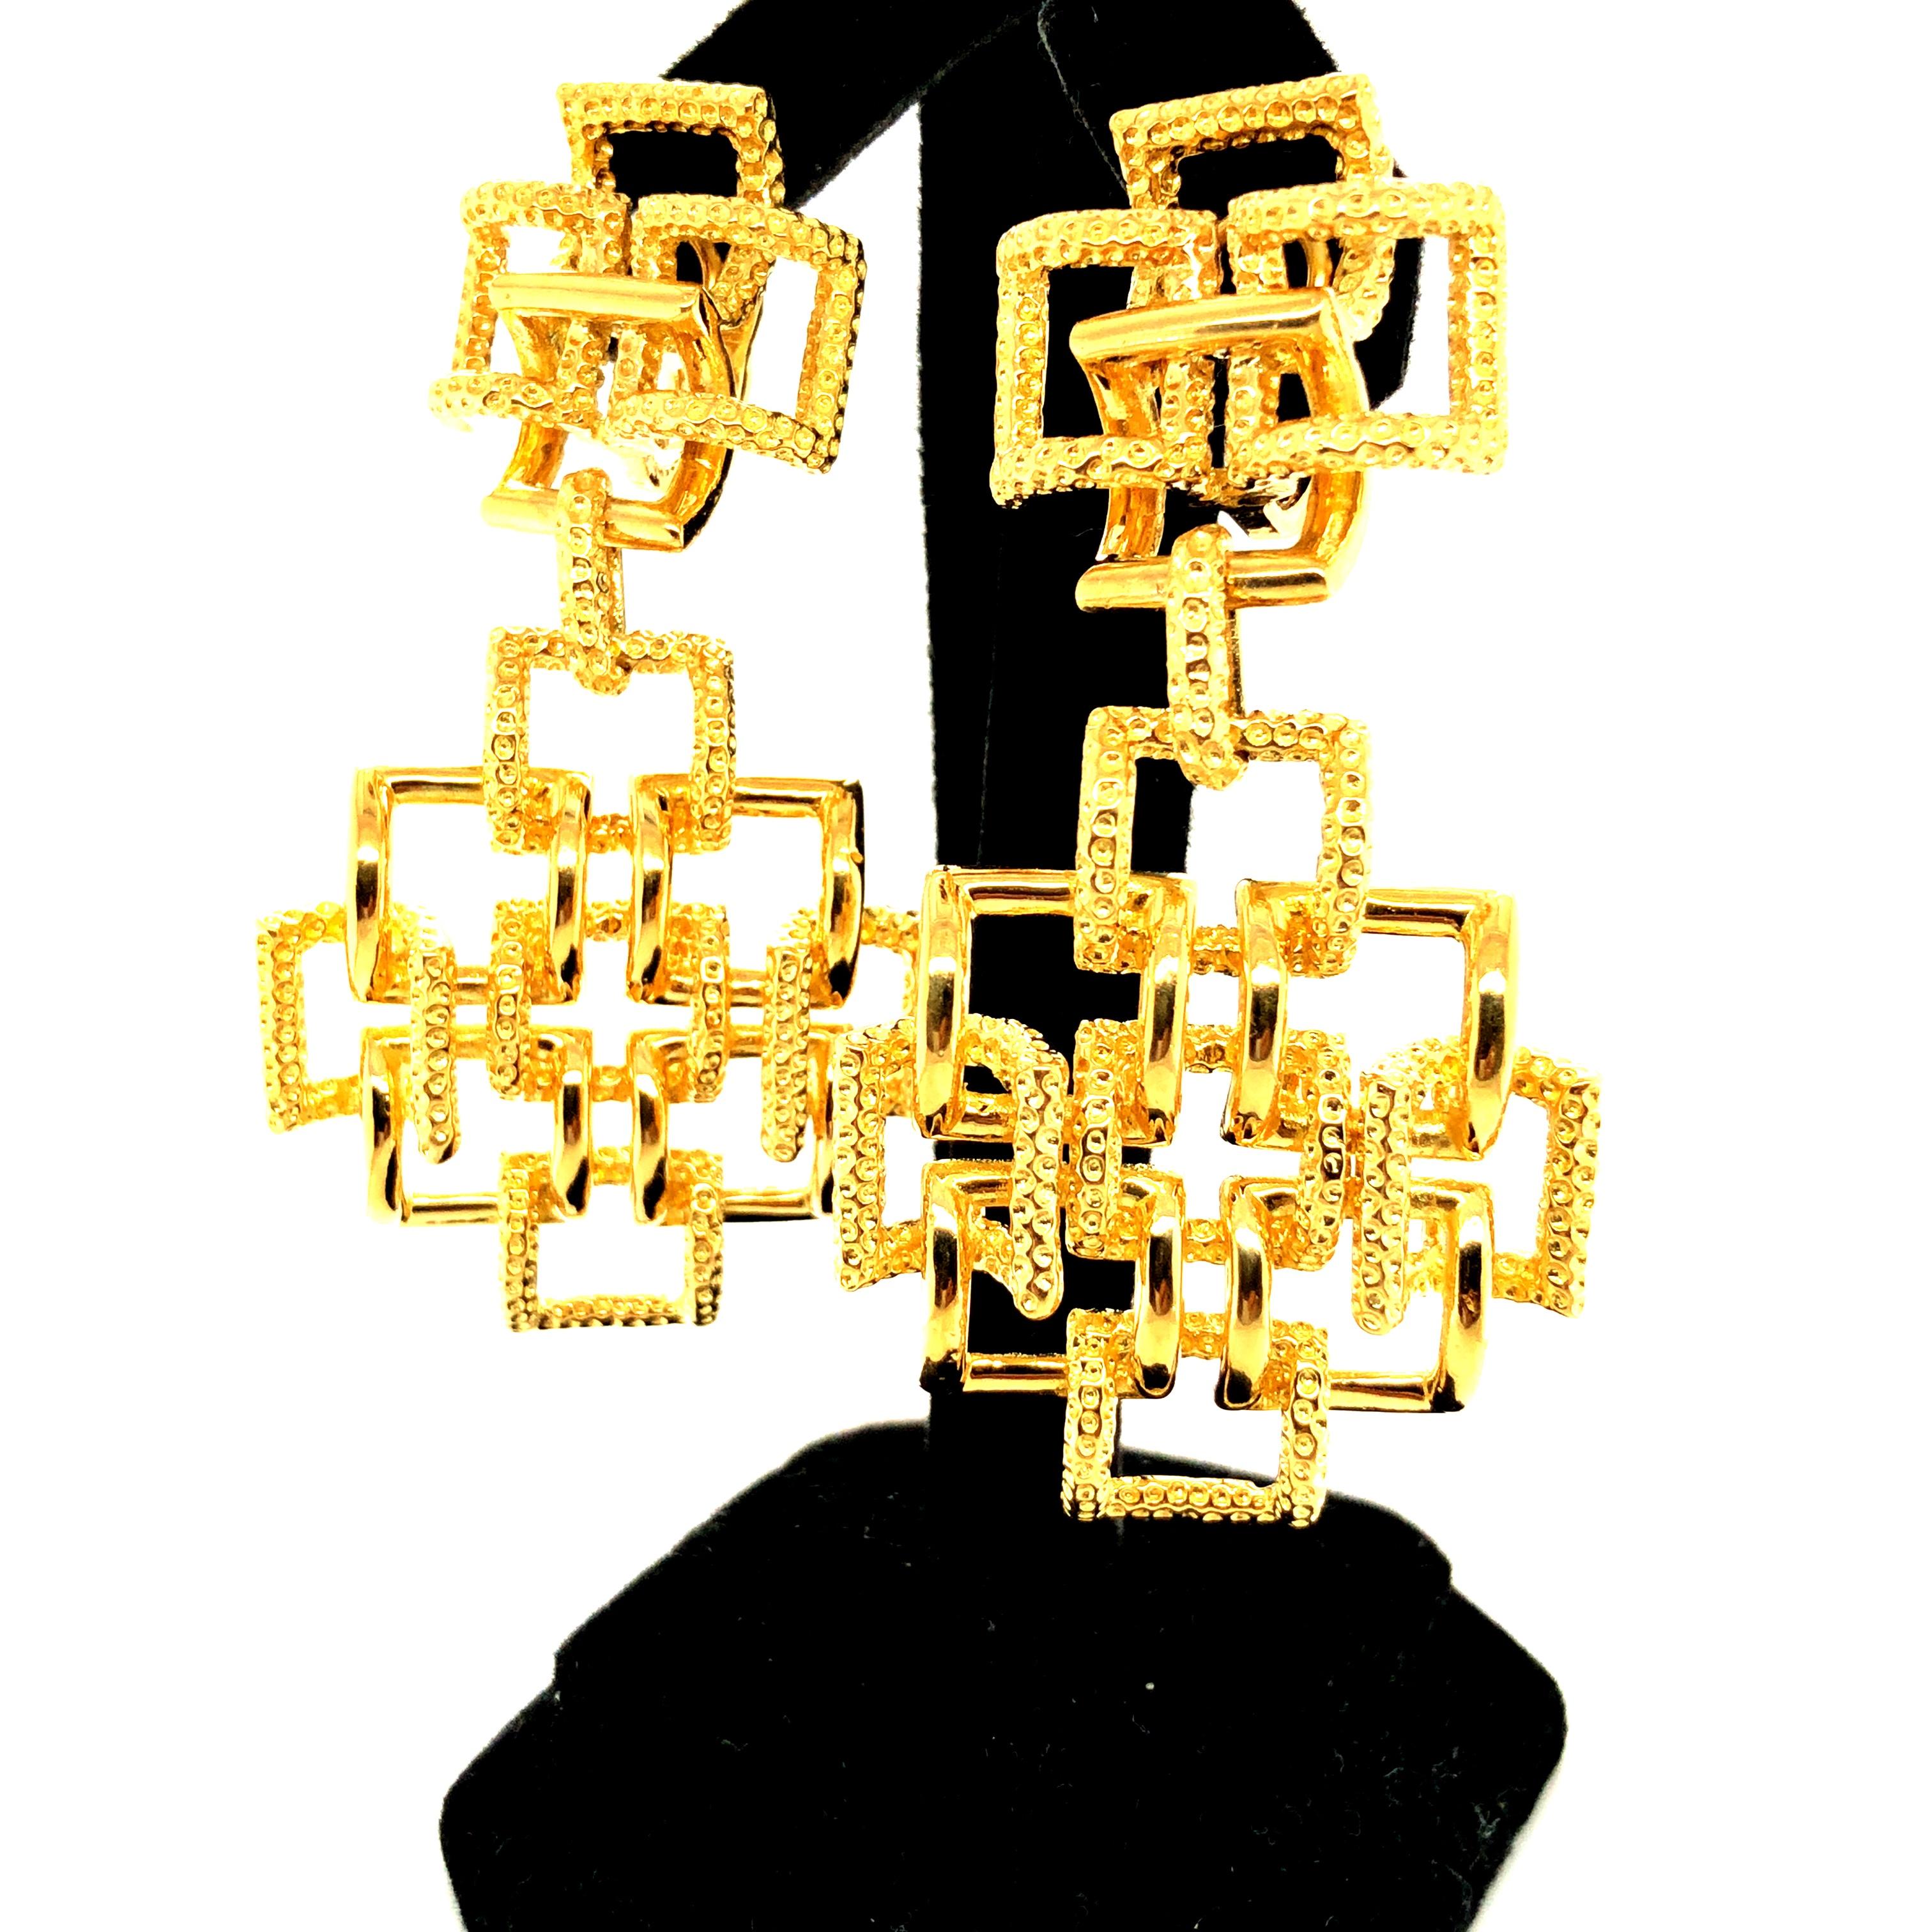 Offered here is a gorgeous Tiffany & co 18k yellow gold clip on earrings. The earrings are from the late 1960’s early 1970’s. The earrings are stamped 18k on the back of the clip and one of the earring has the makers mark Tiffany & co. The earrings